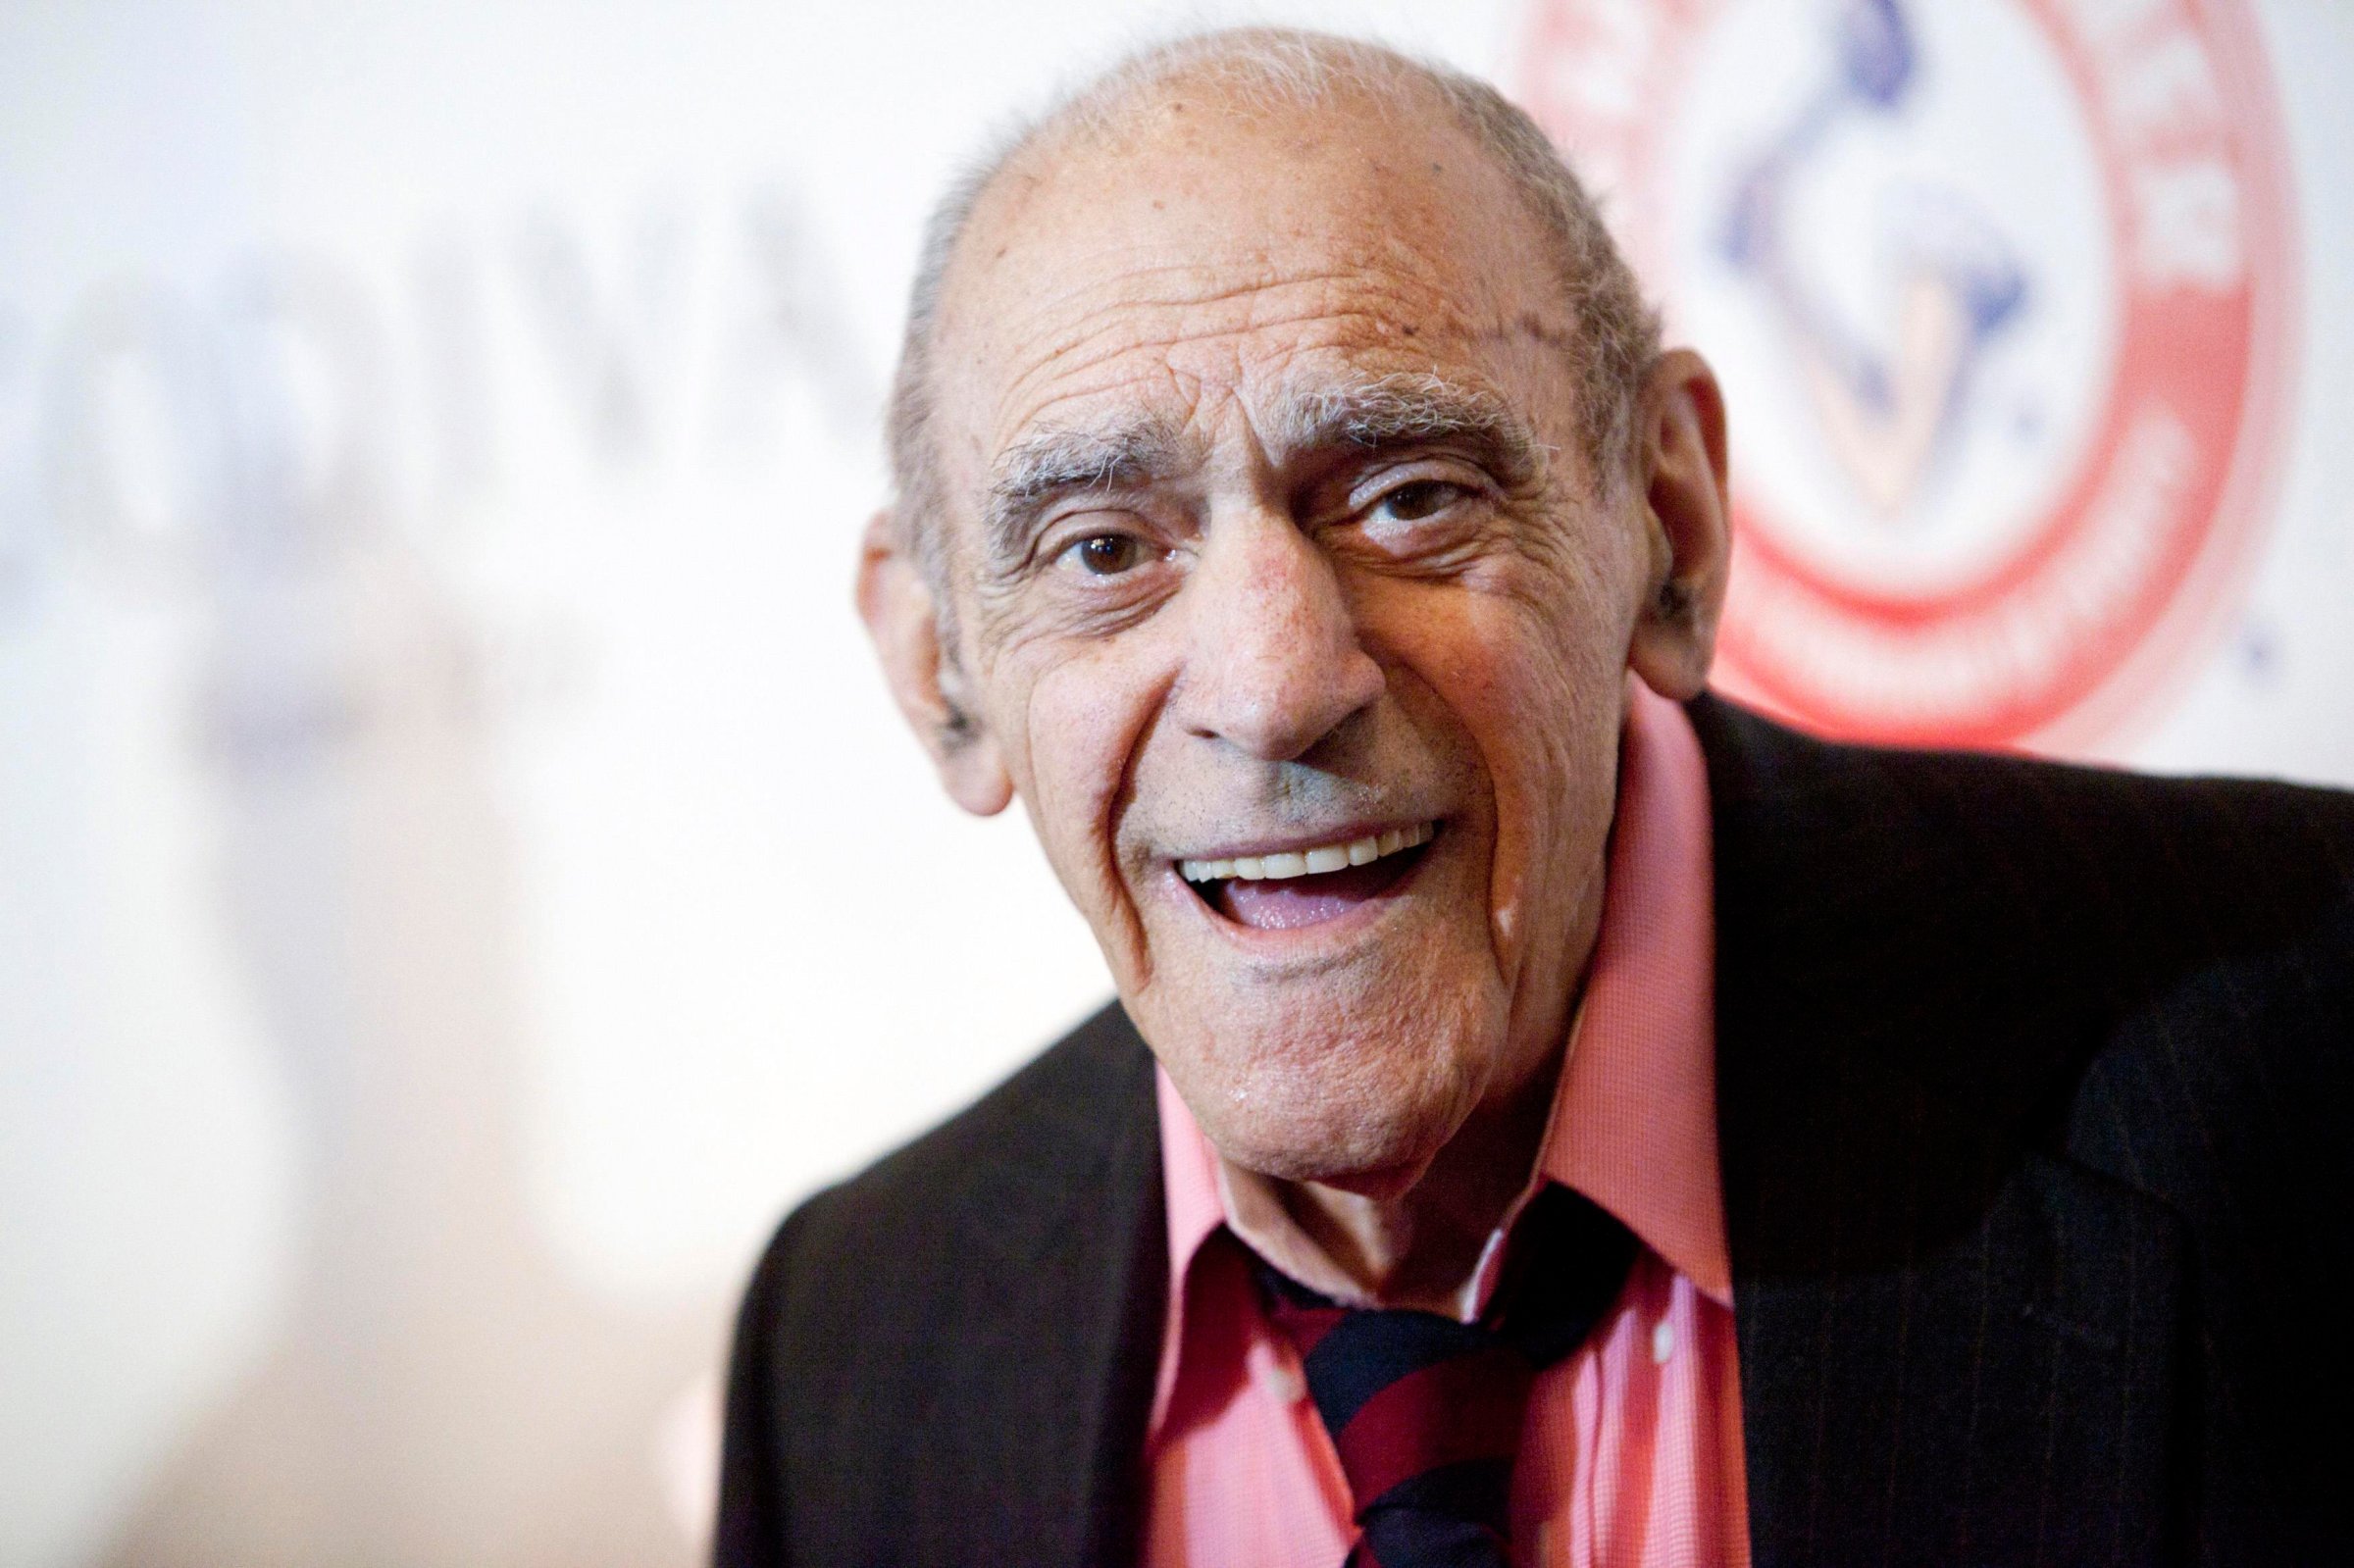 Actor Abe Vigoda smiles as he attends the Friars Club Roast of Betty White in New York in this file photo